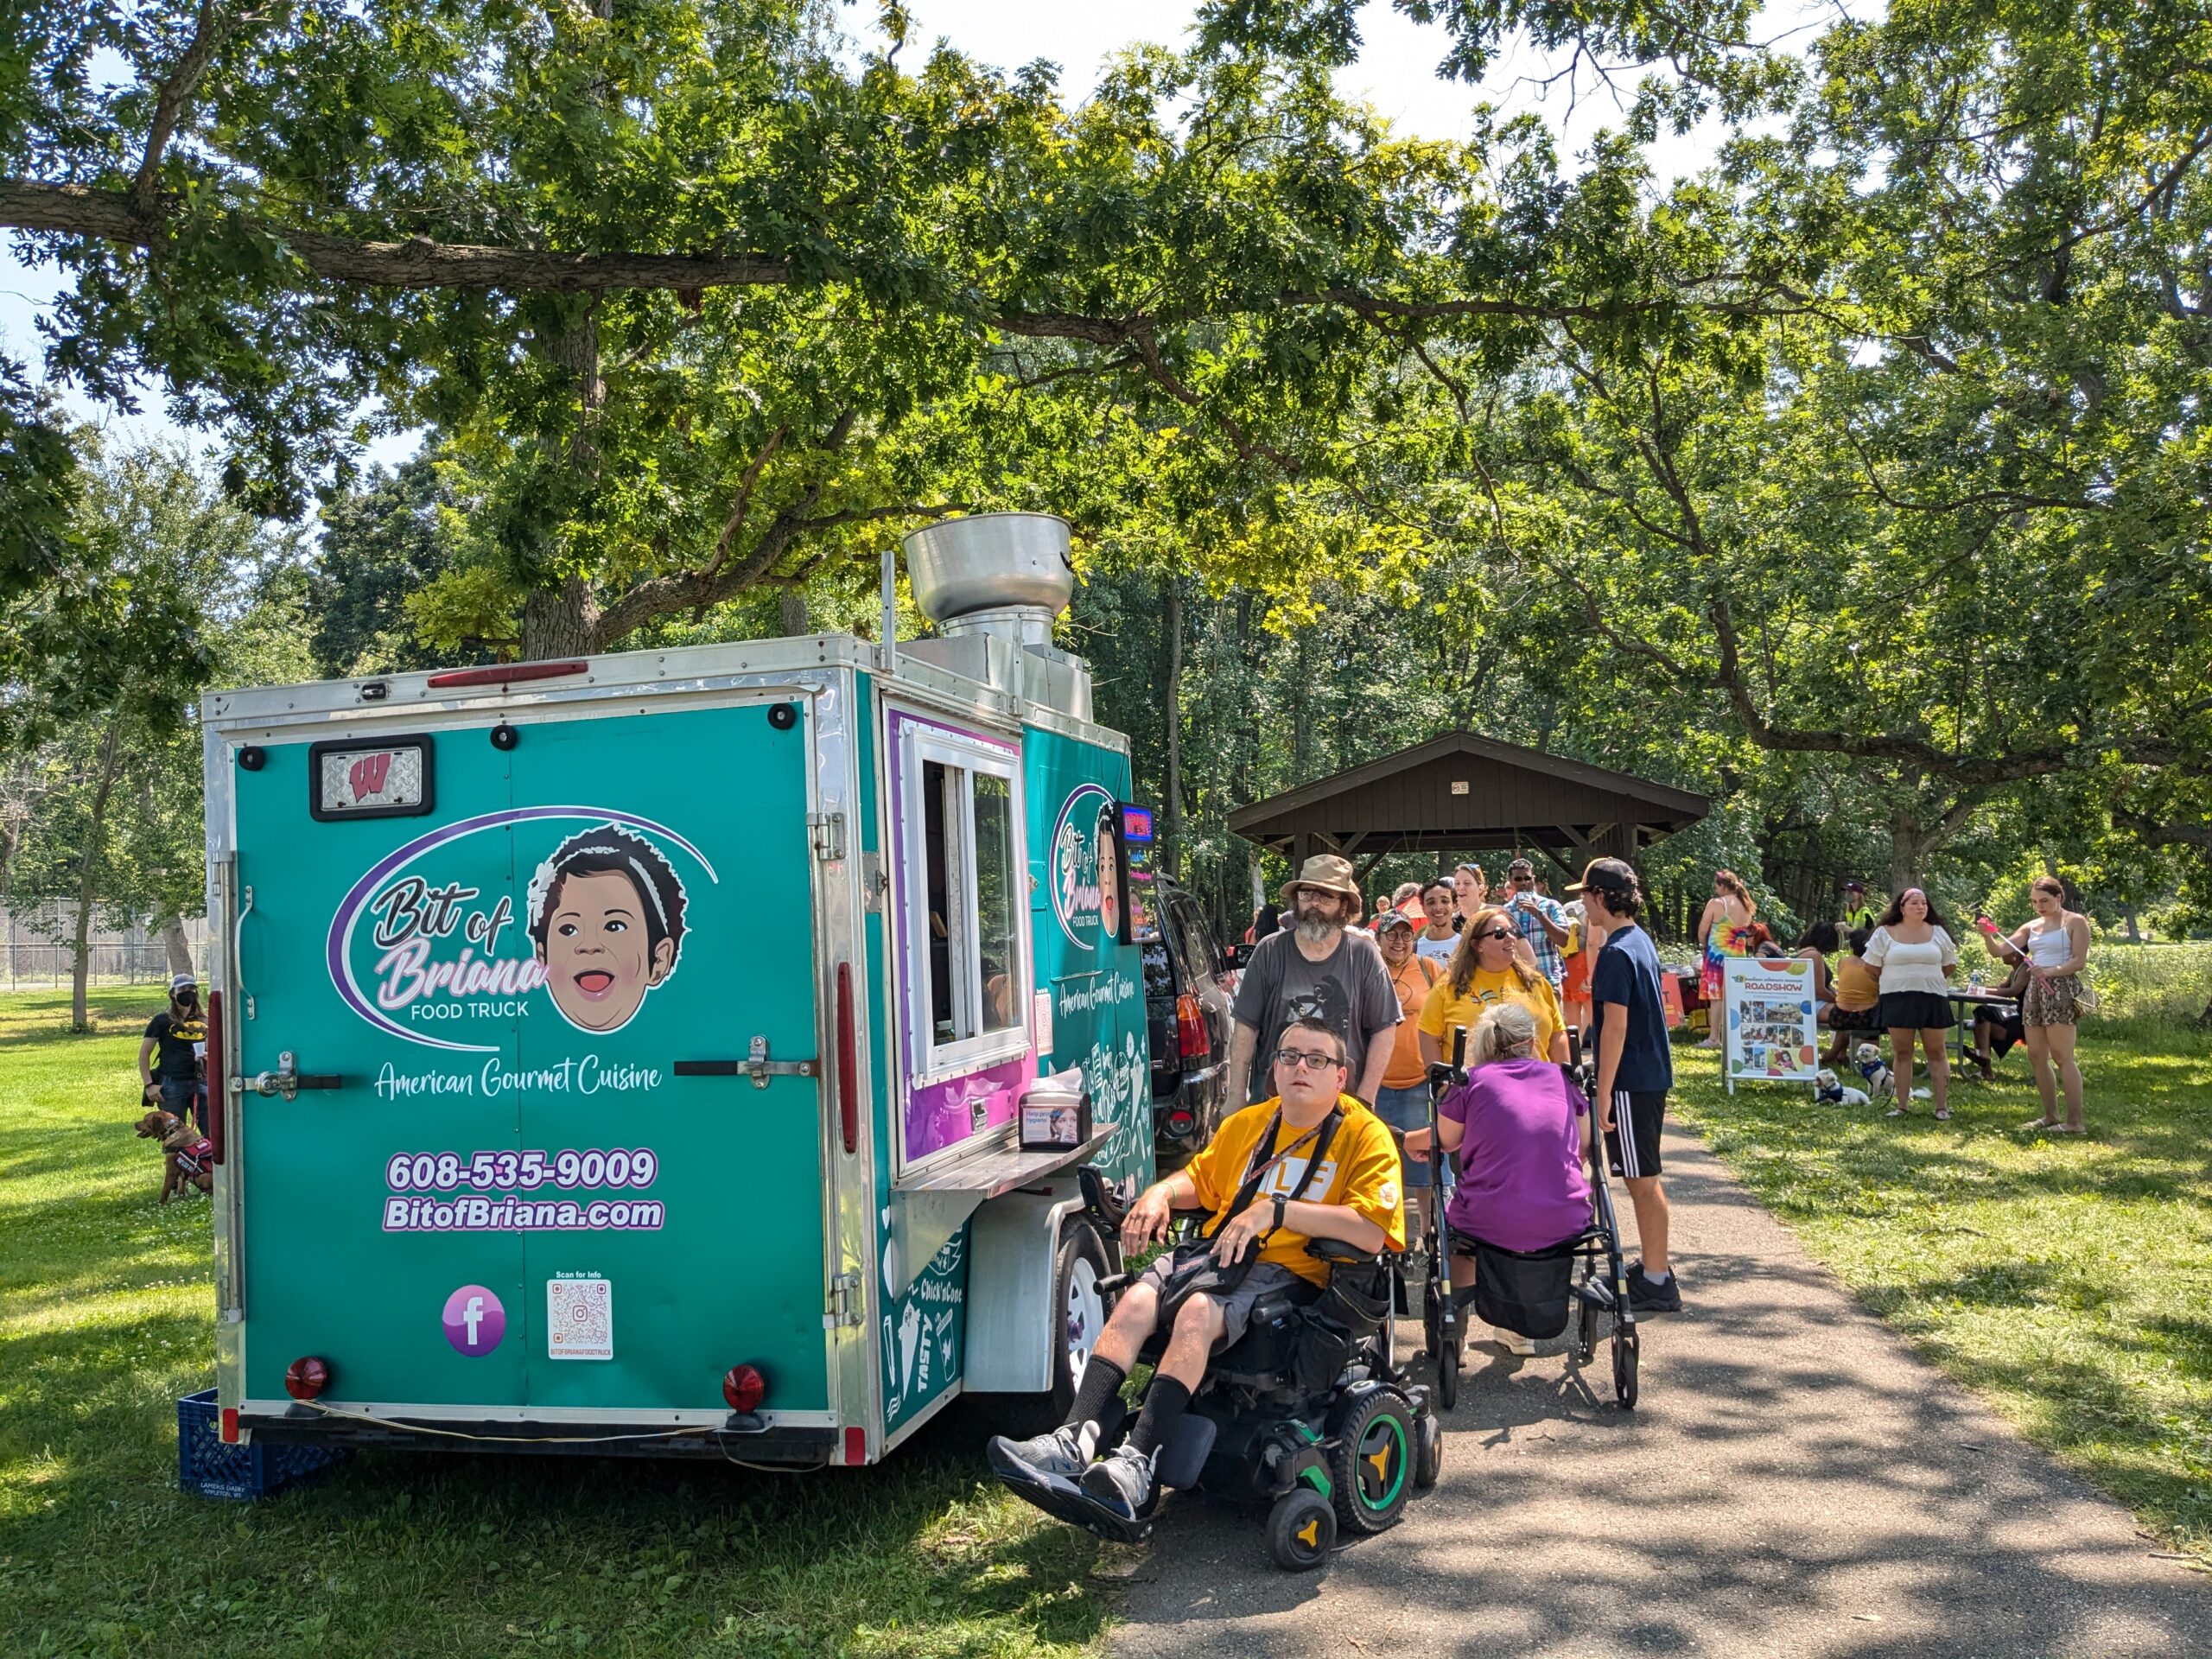 A crowd of people stands and sits in wheelchairs in front of a colorful blue-green food truck with the logo "Bit of Briana."